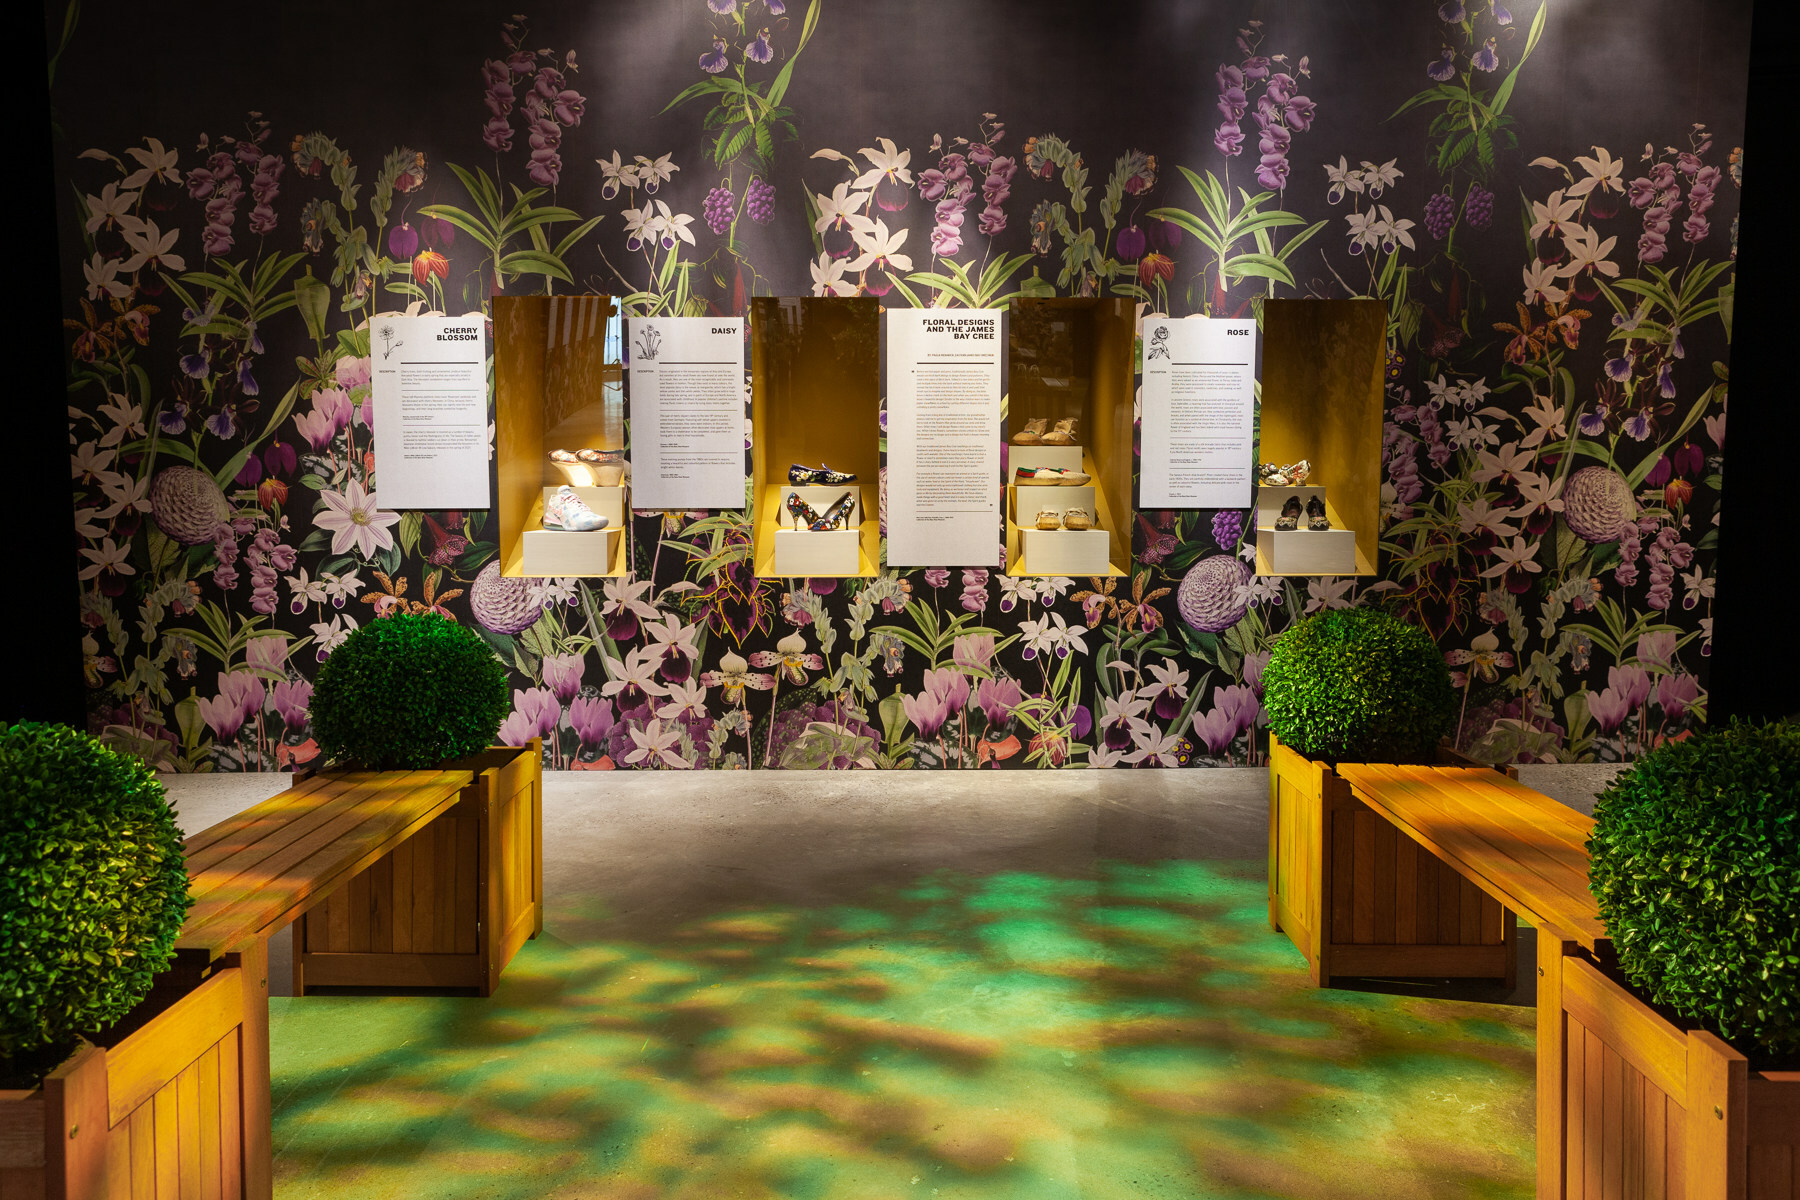 Toronto’s Bata Shoe Museum blooms with a new exhibition exploring flowers in footwear